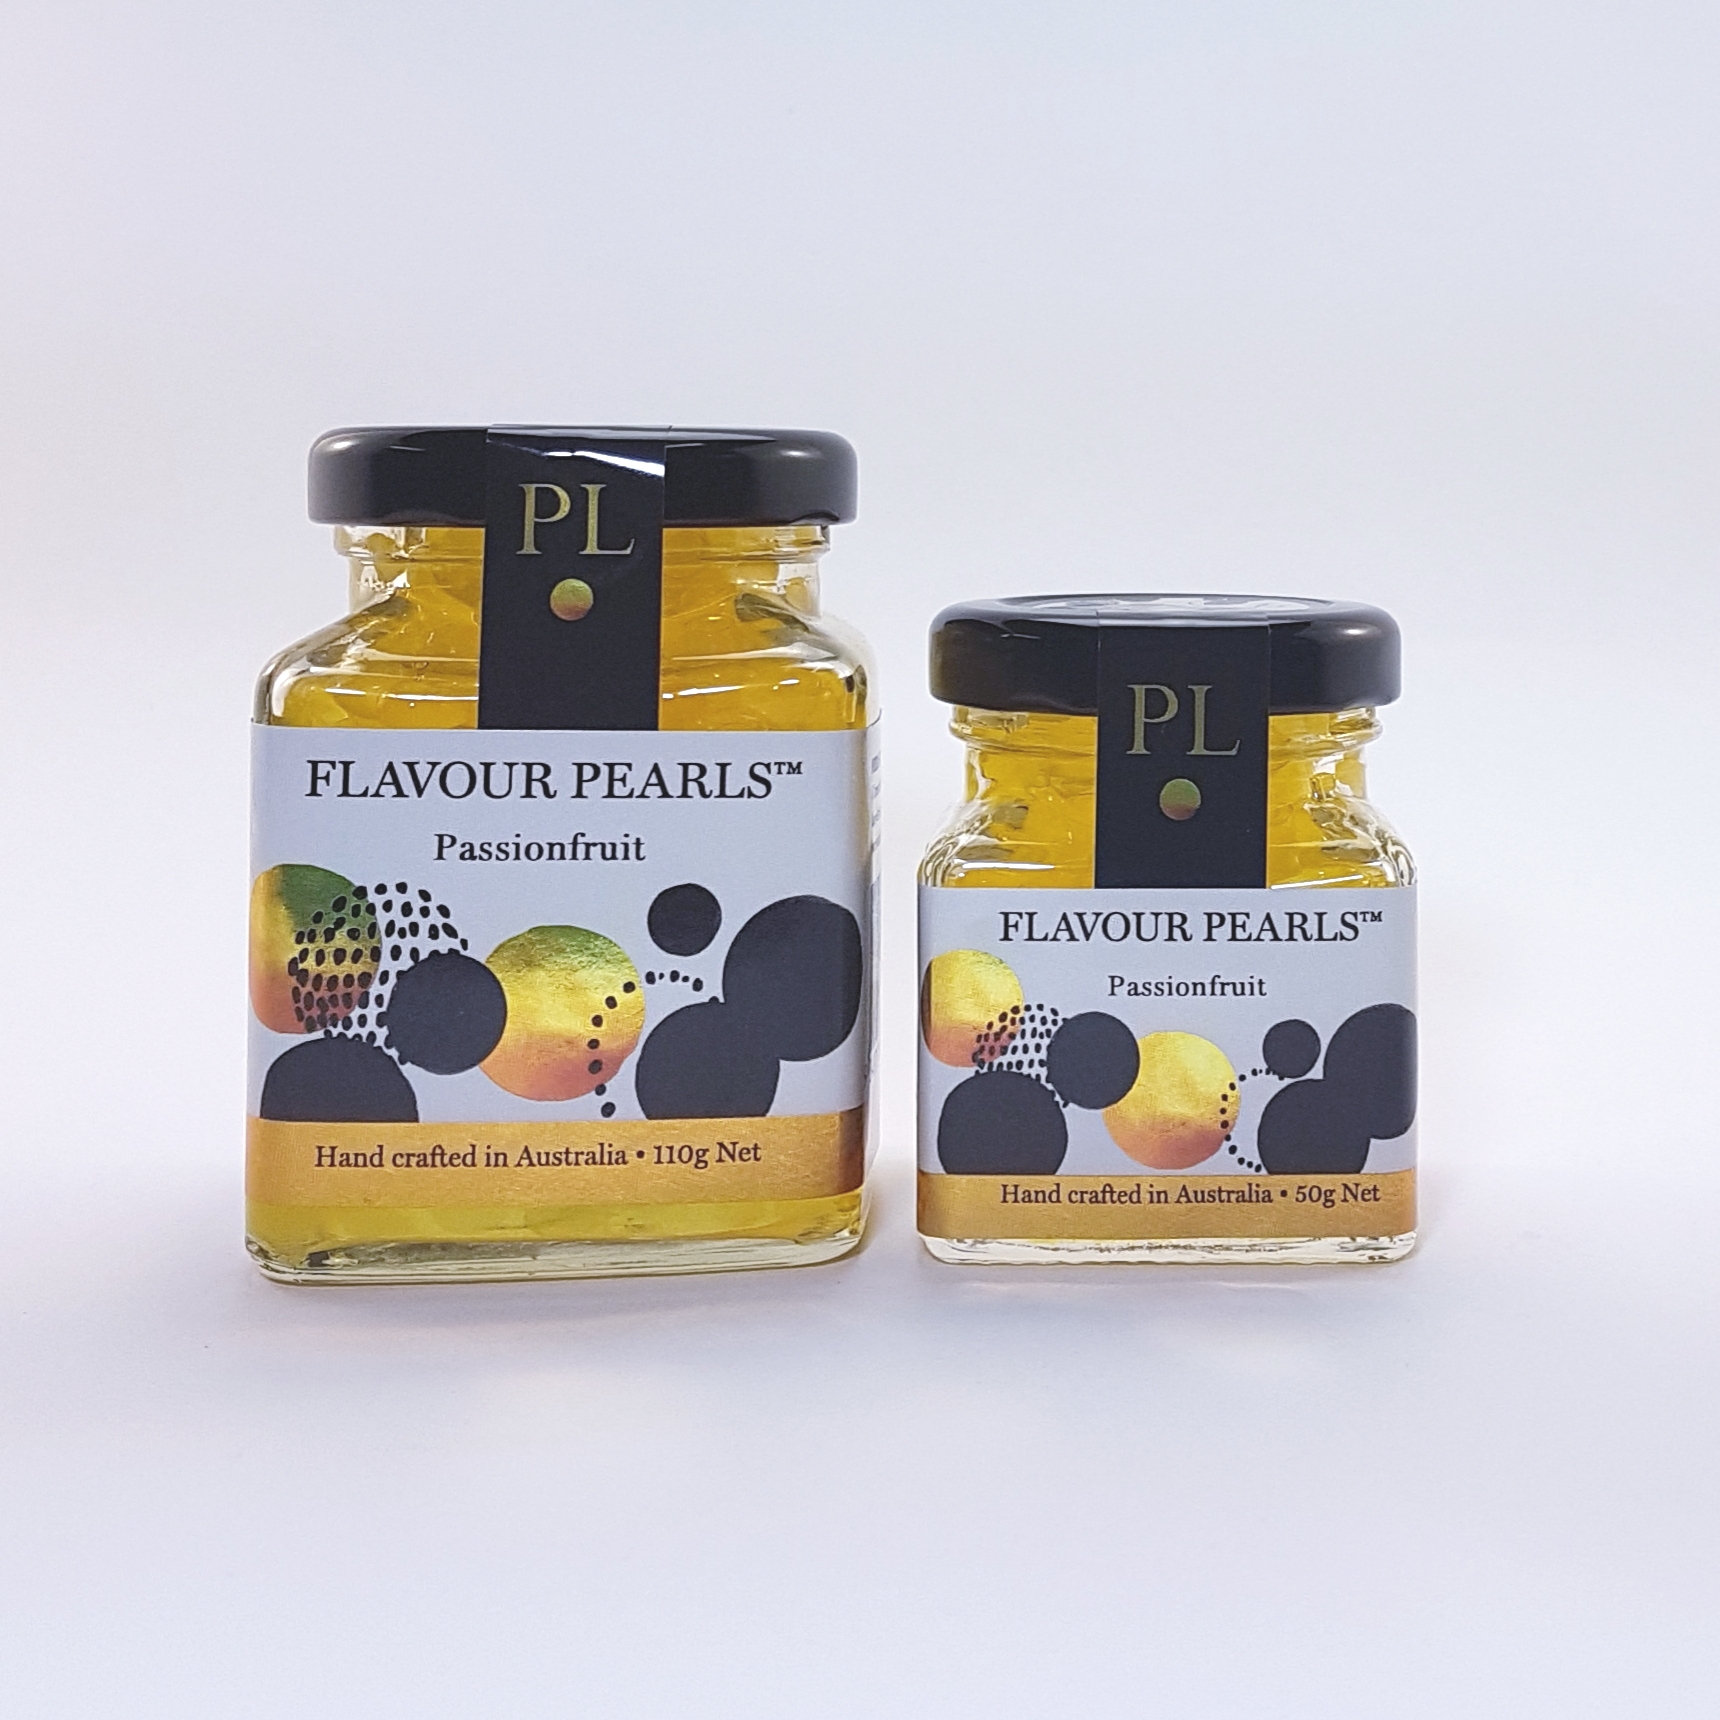 Passionfruit Flavour Pearls 110g and 50g Jars